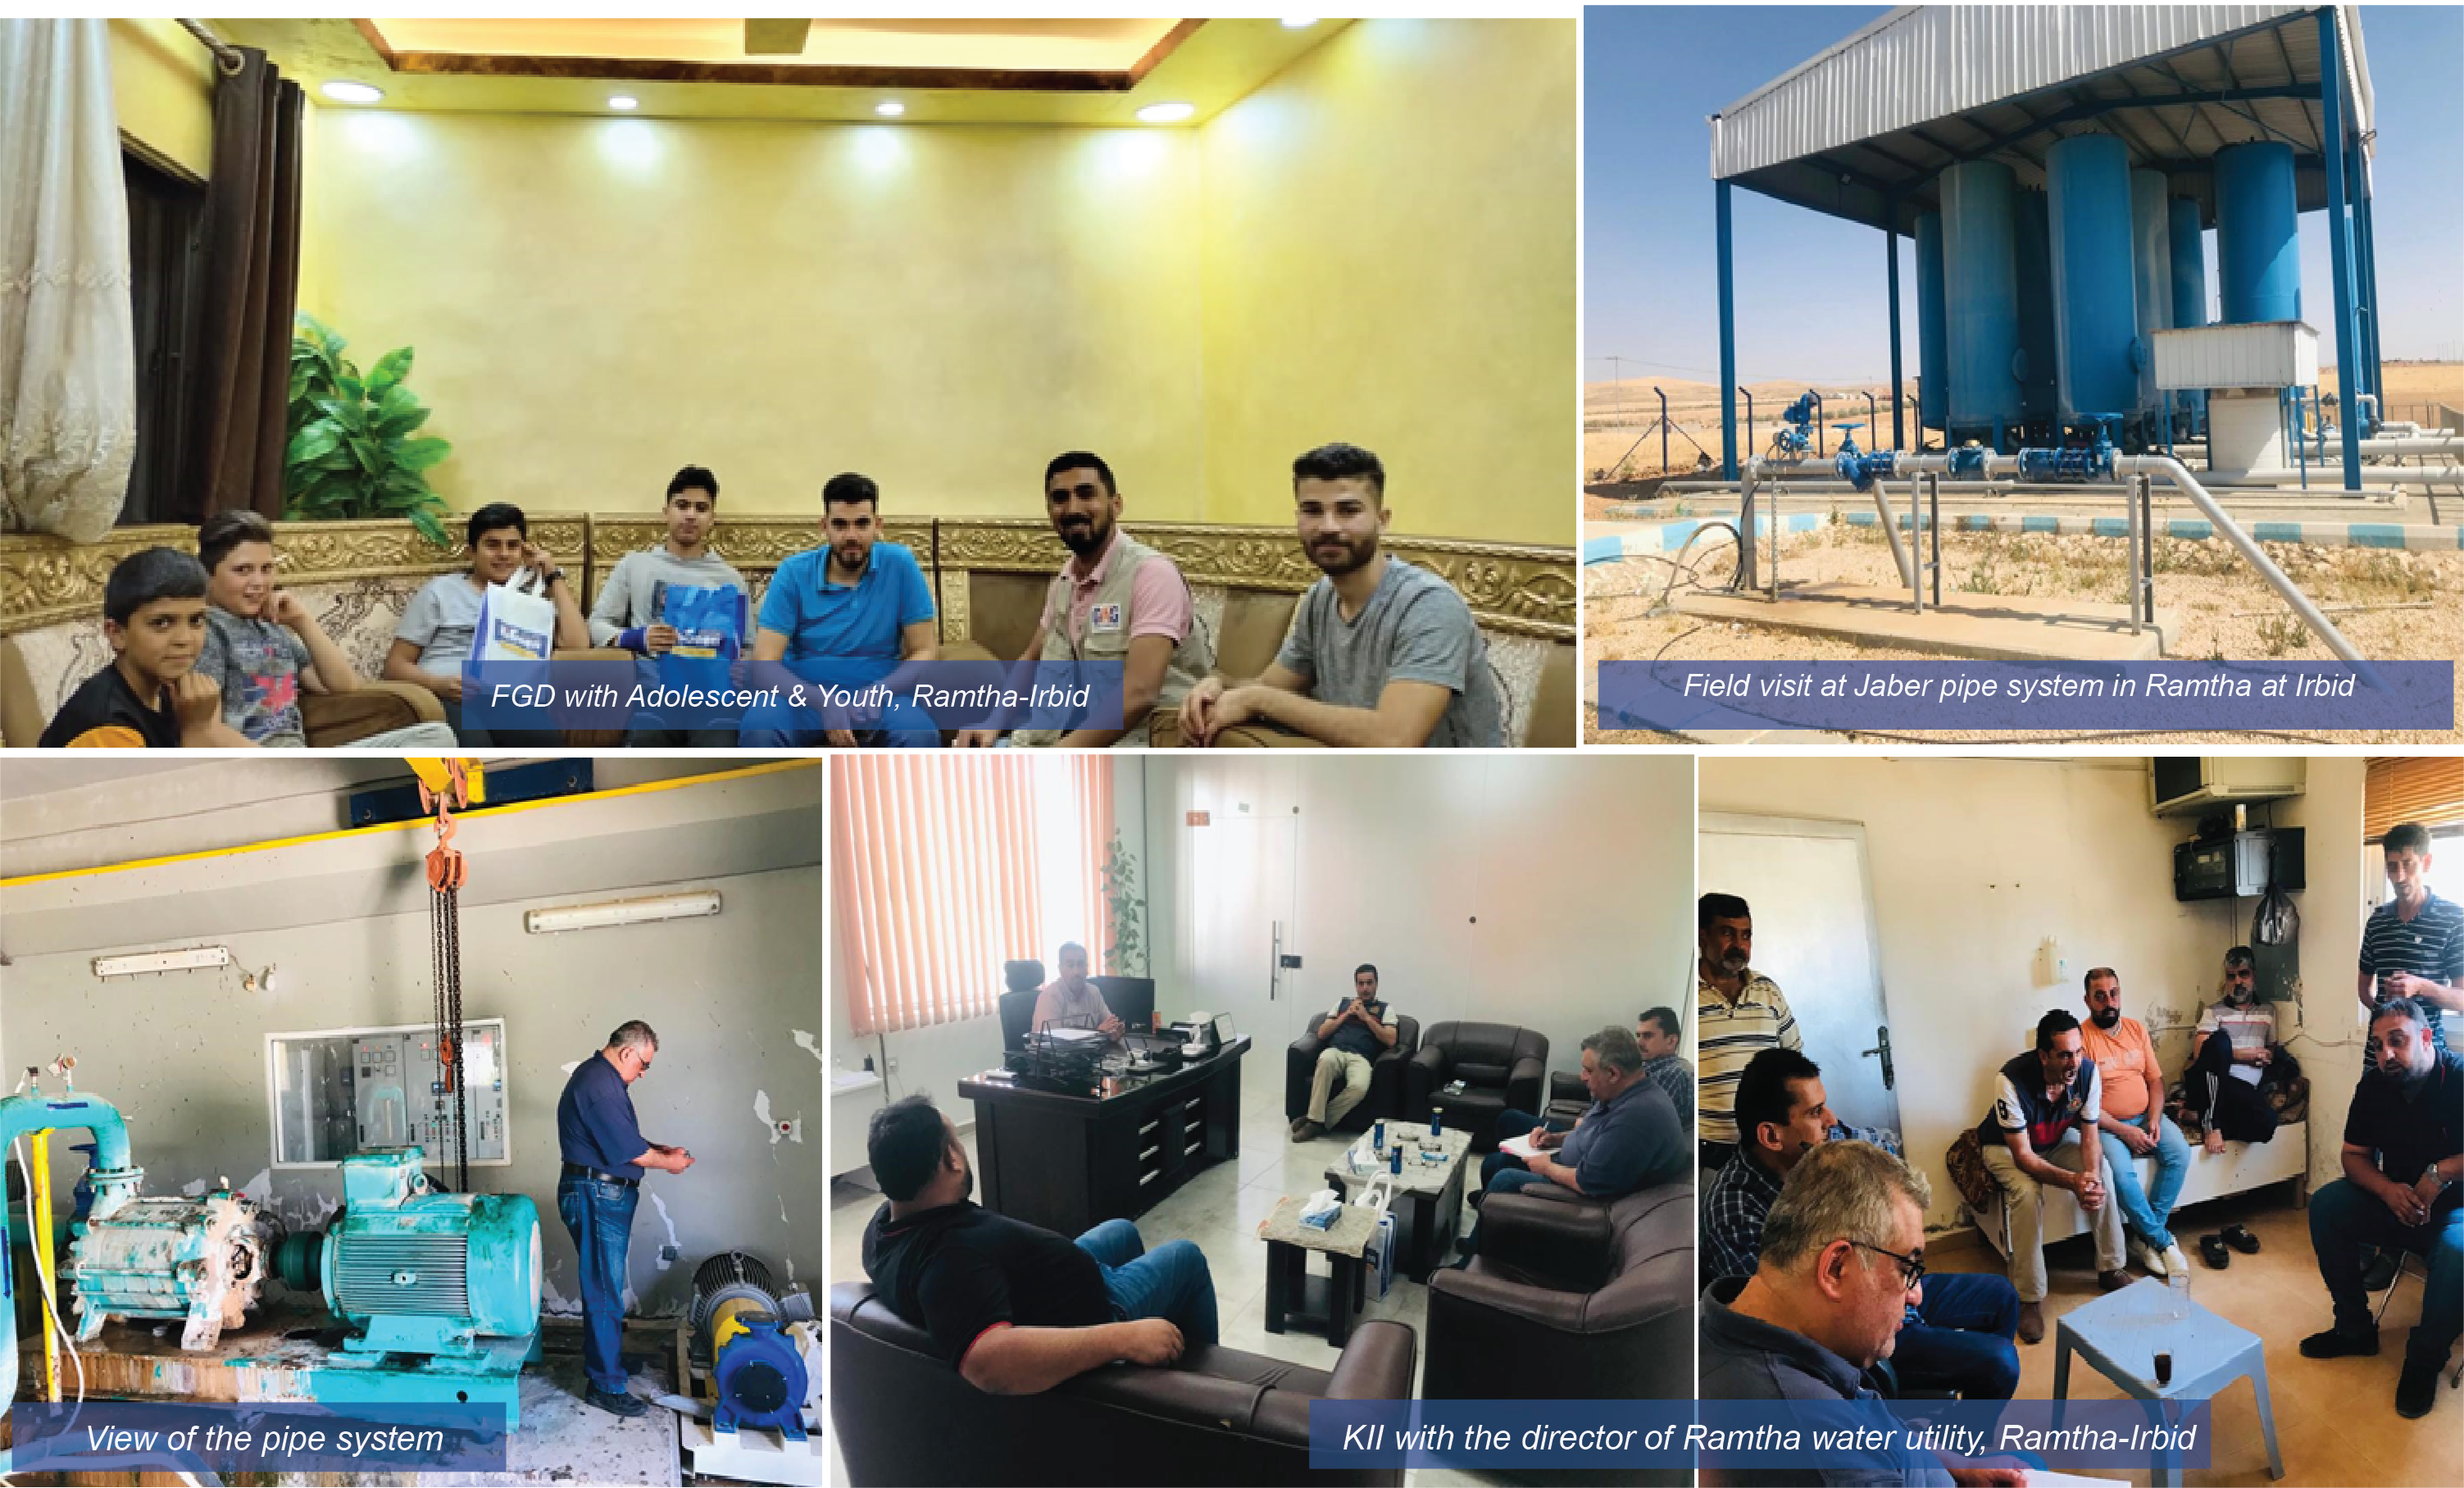 At the same time field visit were been done in Ramtha Al Hudoud PS, Ramtha-Irbid